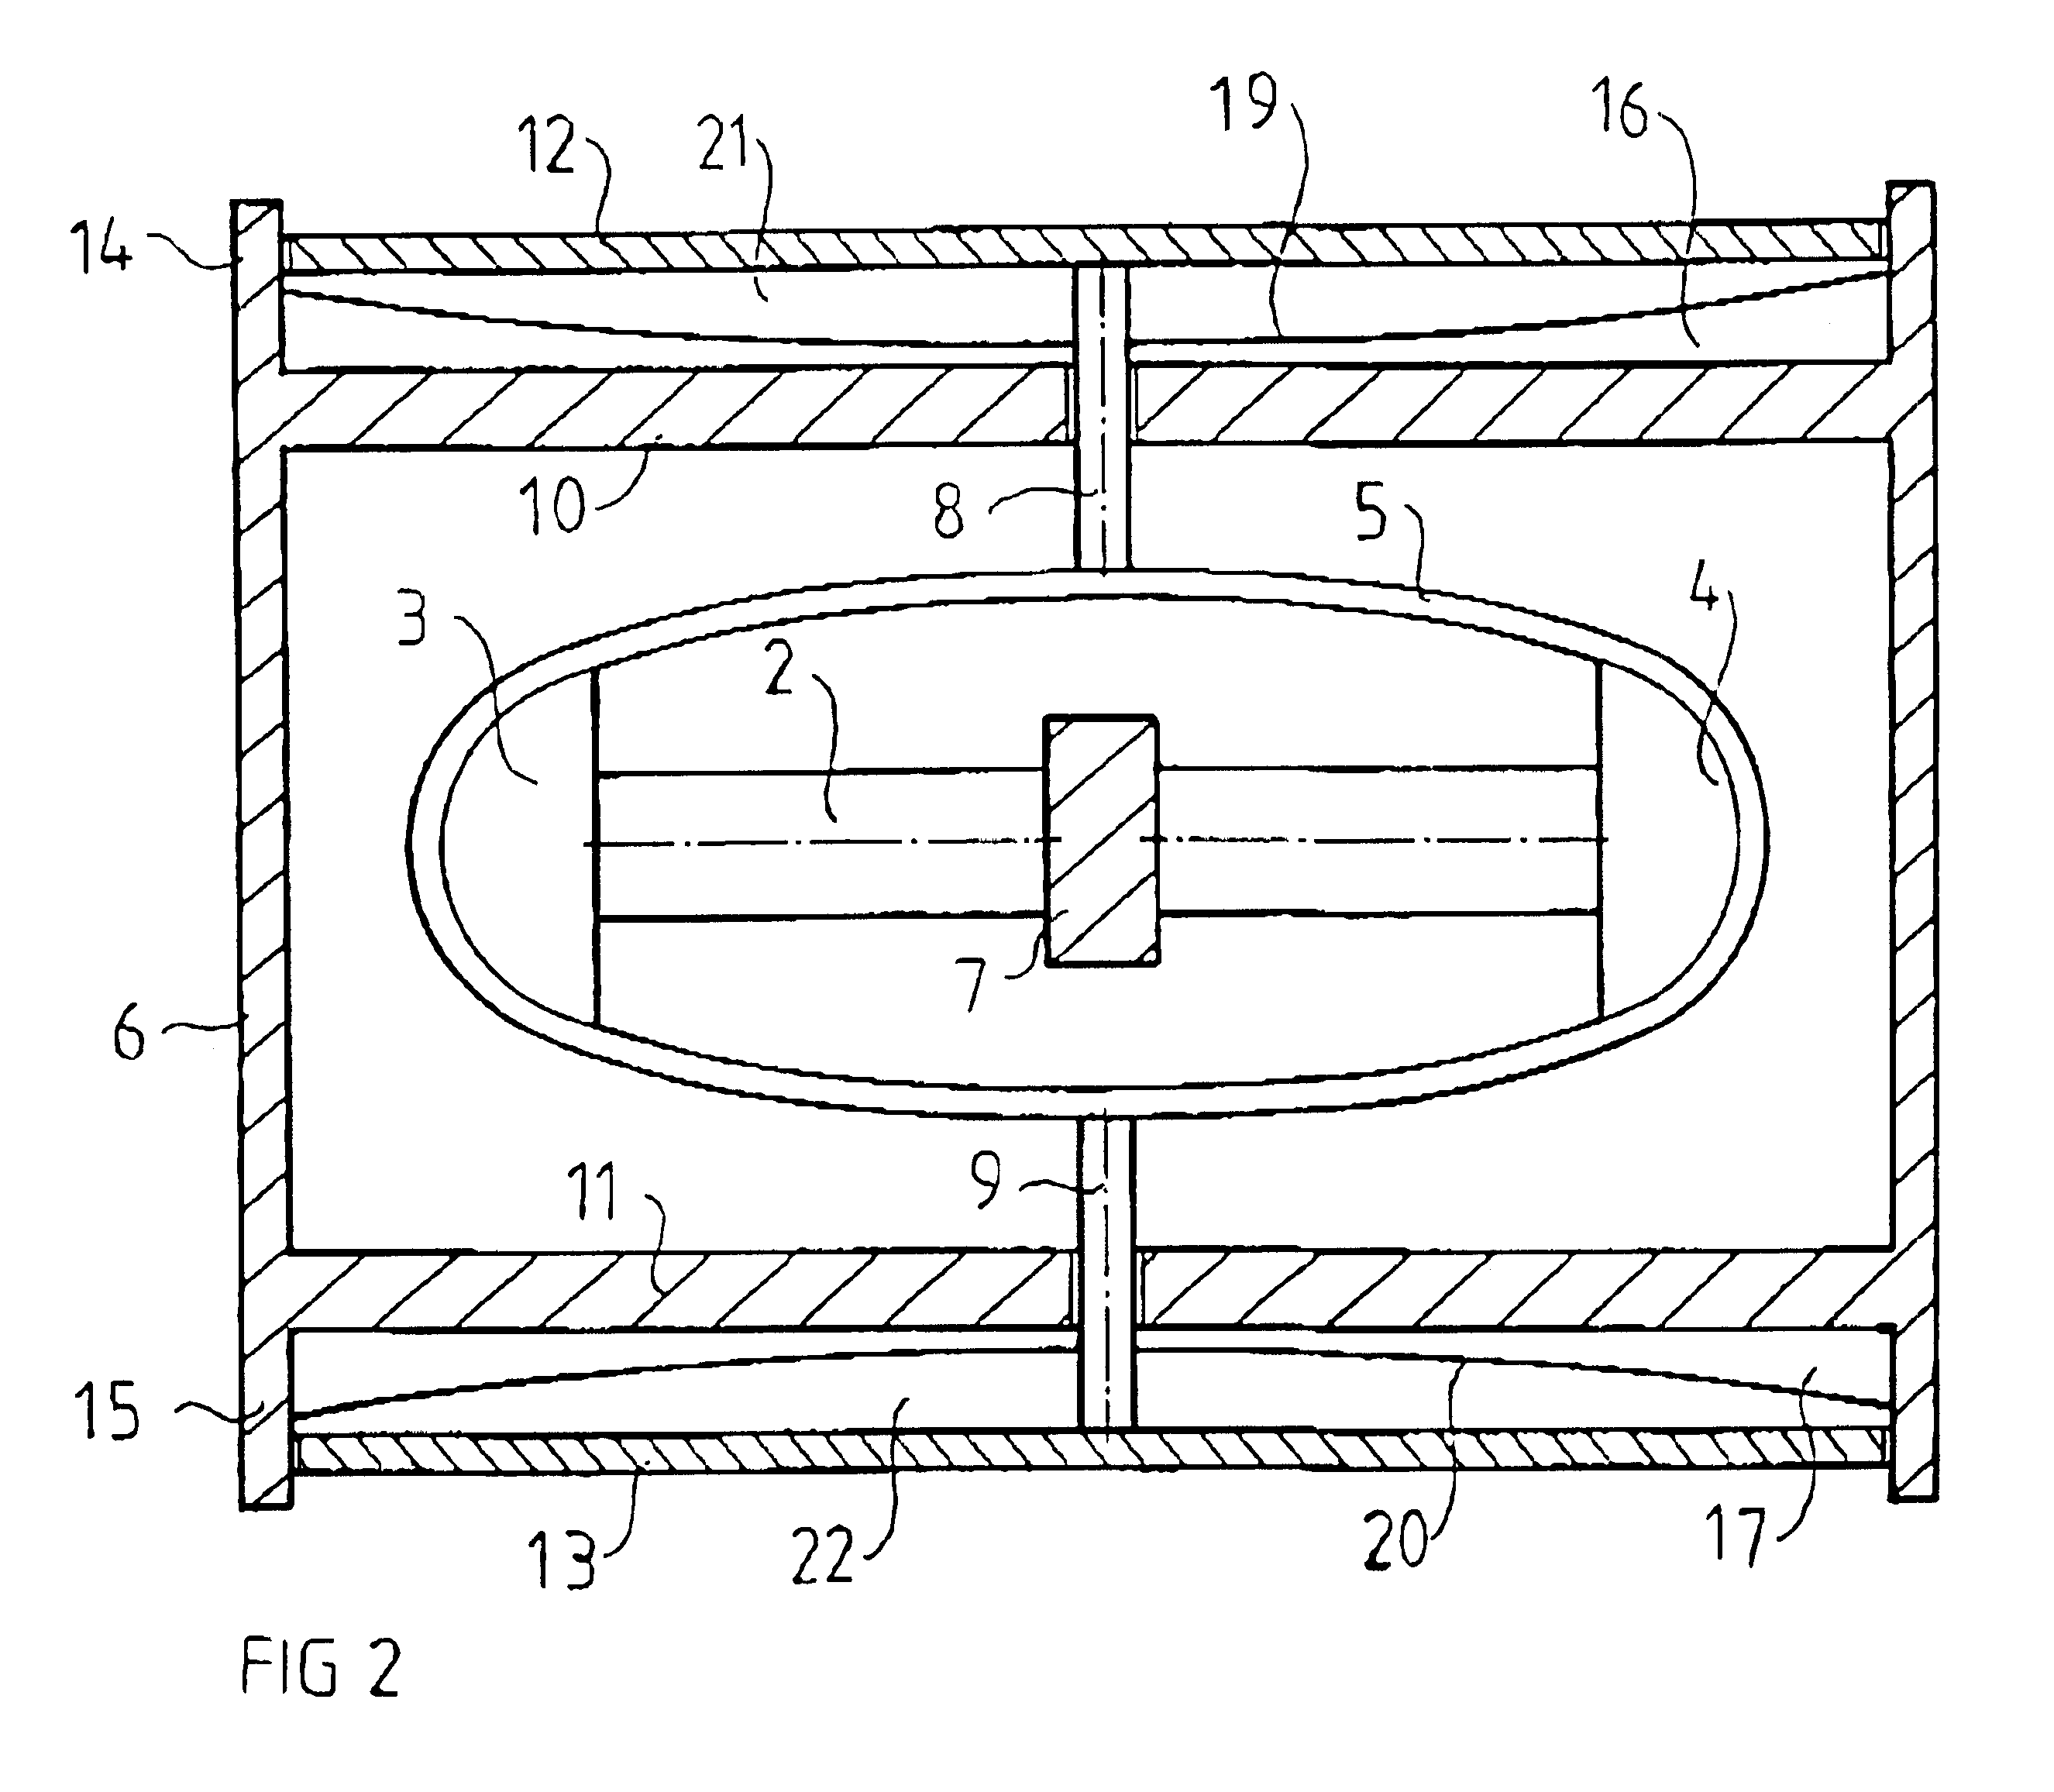 Driving device for a hydroacoustic transmitter